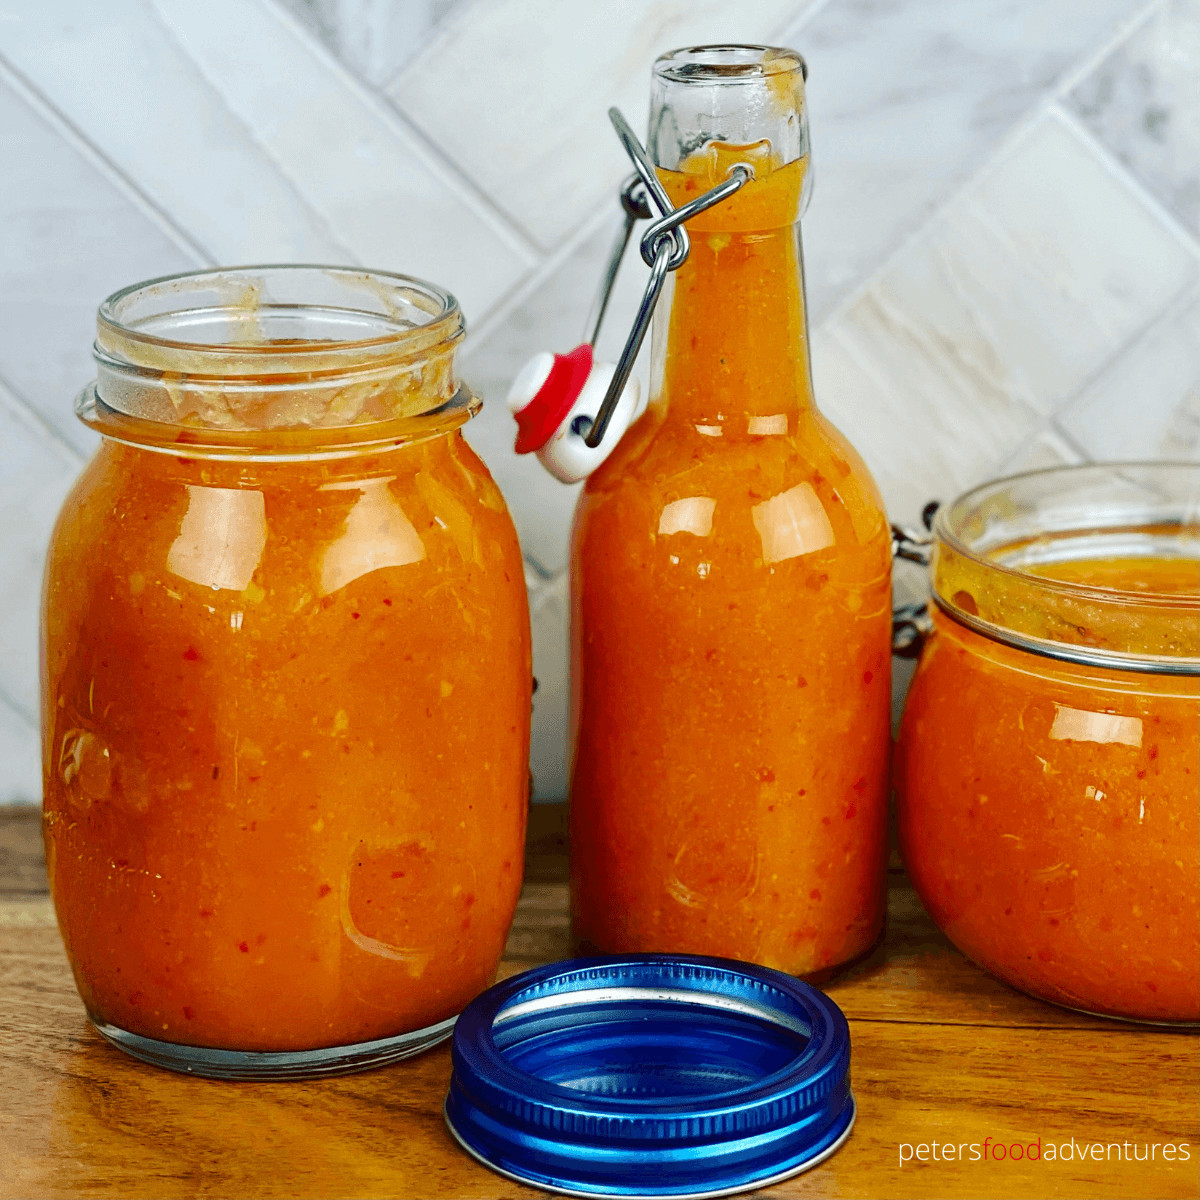 This Chili Mango Sauce is the perfect blend of sweet and spicy sauce. Delicious with seafood, chicken or pork, or as a dipping sauce. Easy to make with an explosion of tropical flavor, packs the perfect punch, extra spicy if you use habaneros! Not too spicy, not too sweet but just right!